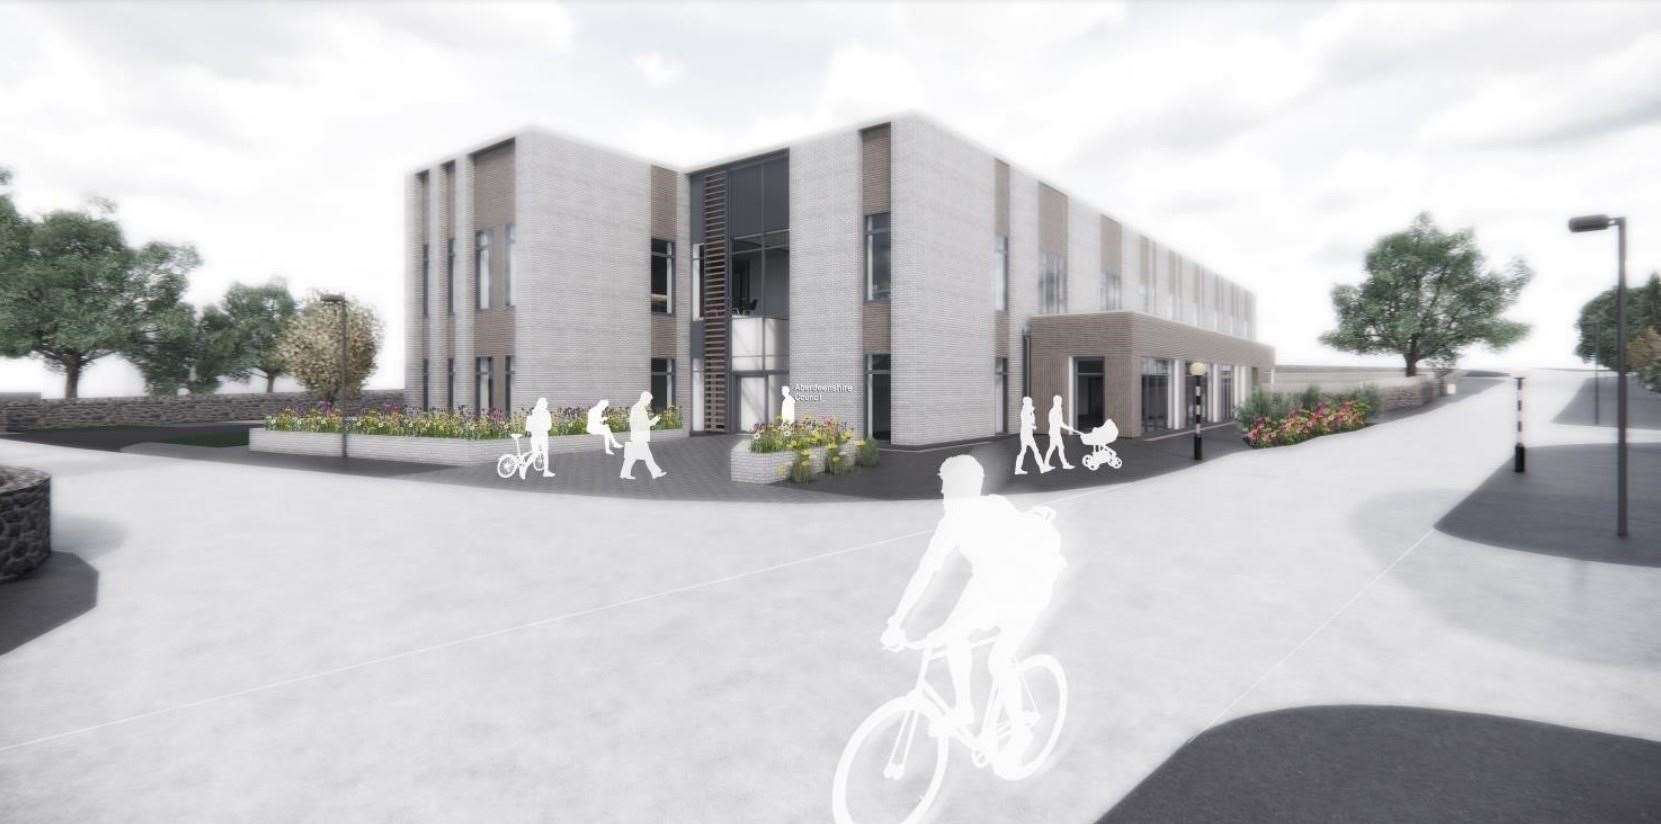 An artist impression of the proposed new Aberdeenshire Council facilities in Ellon.